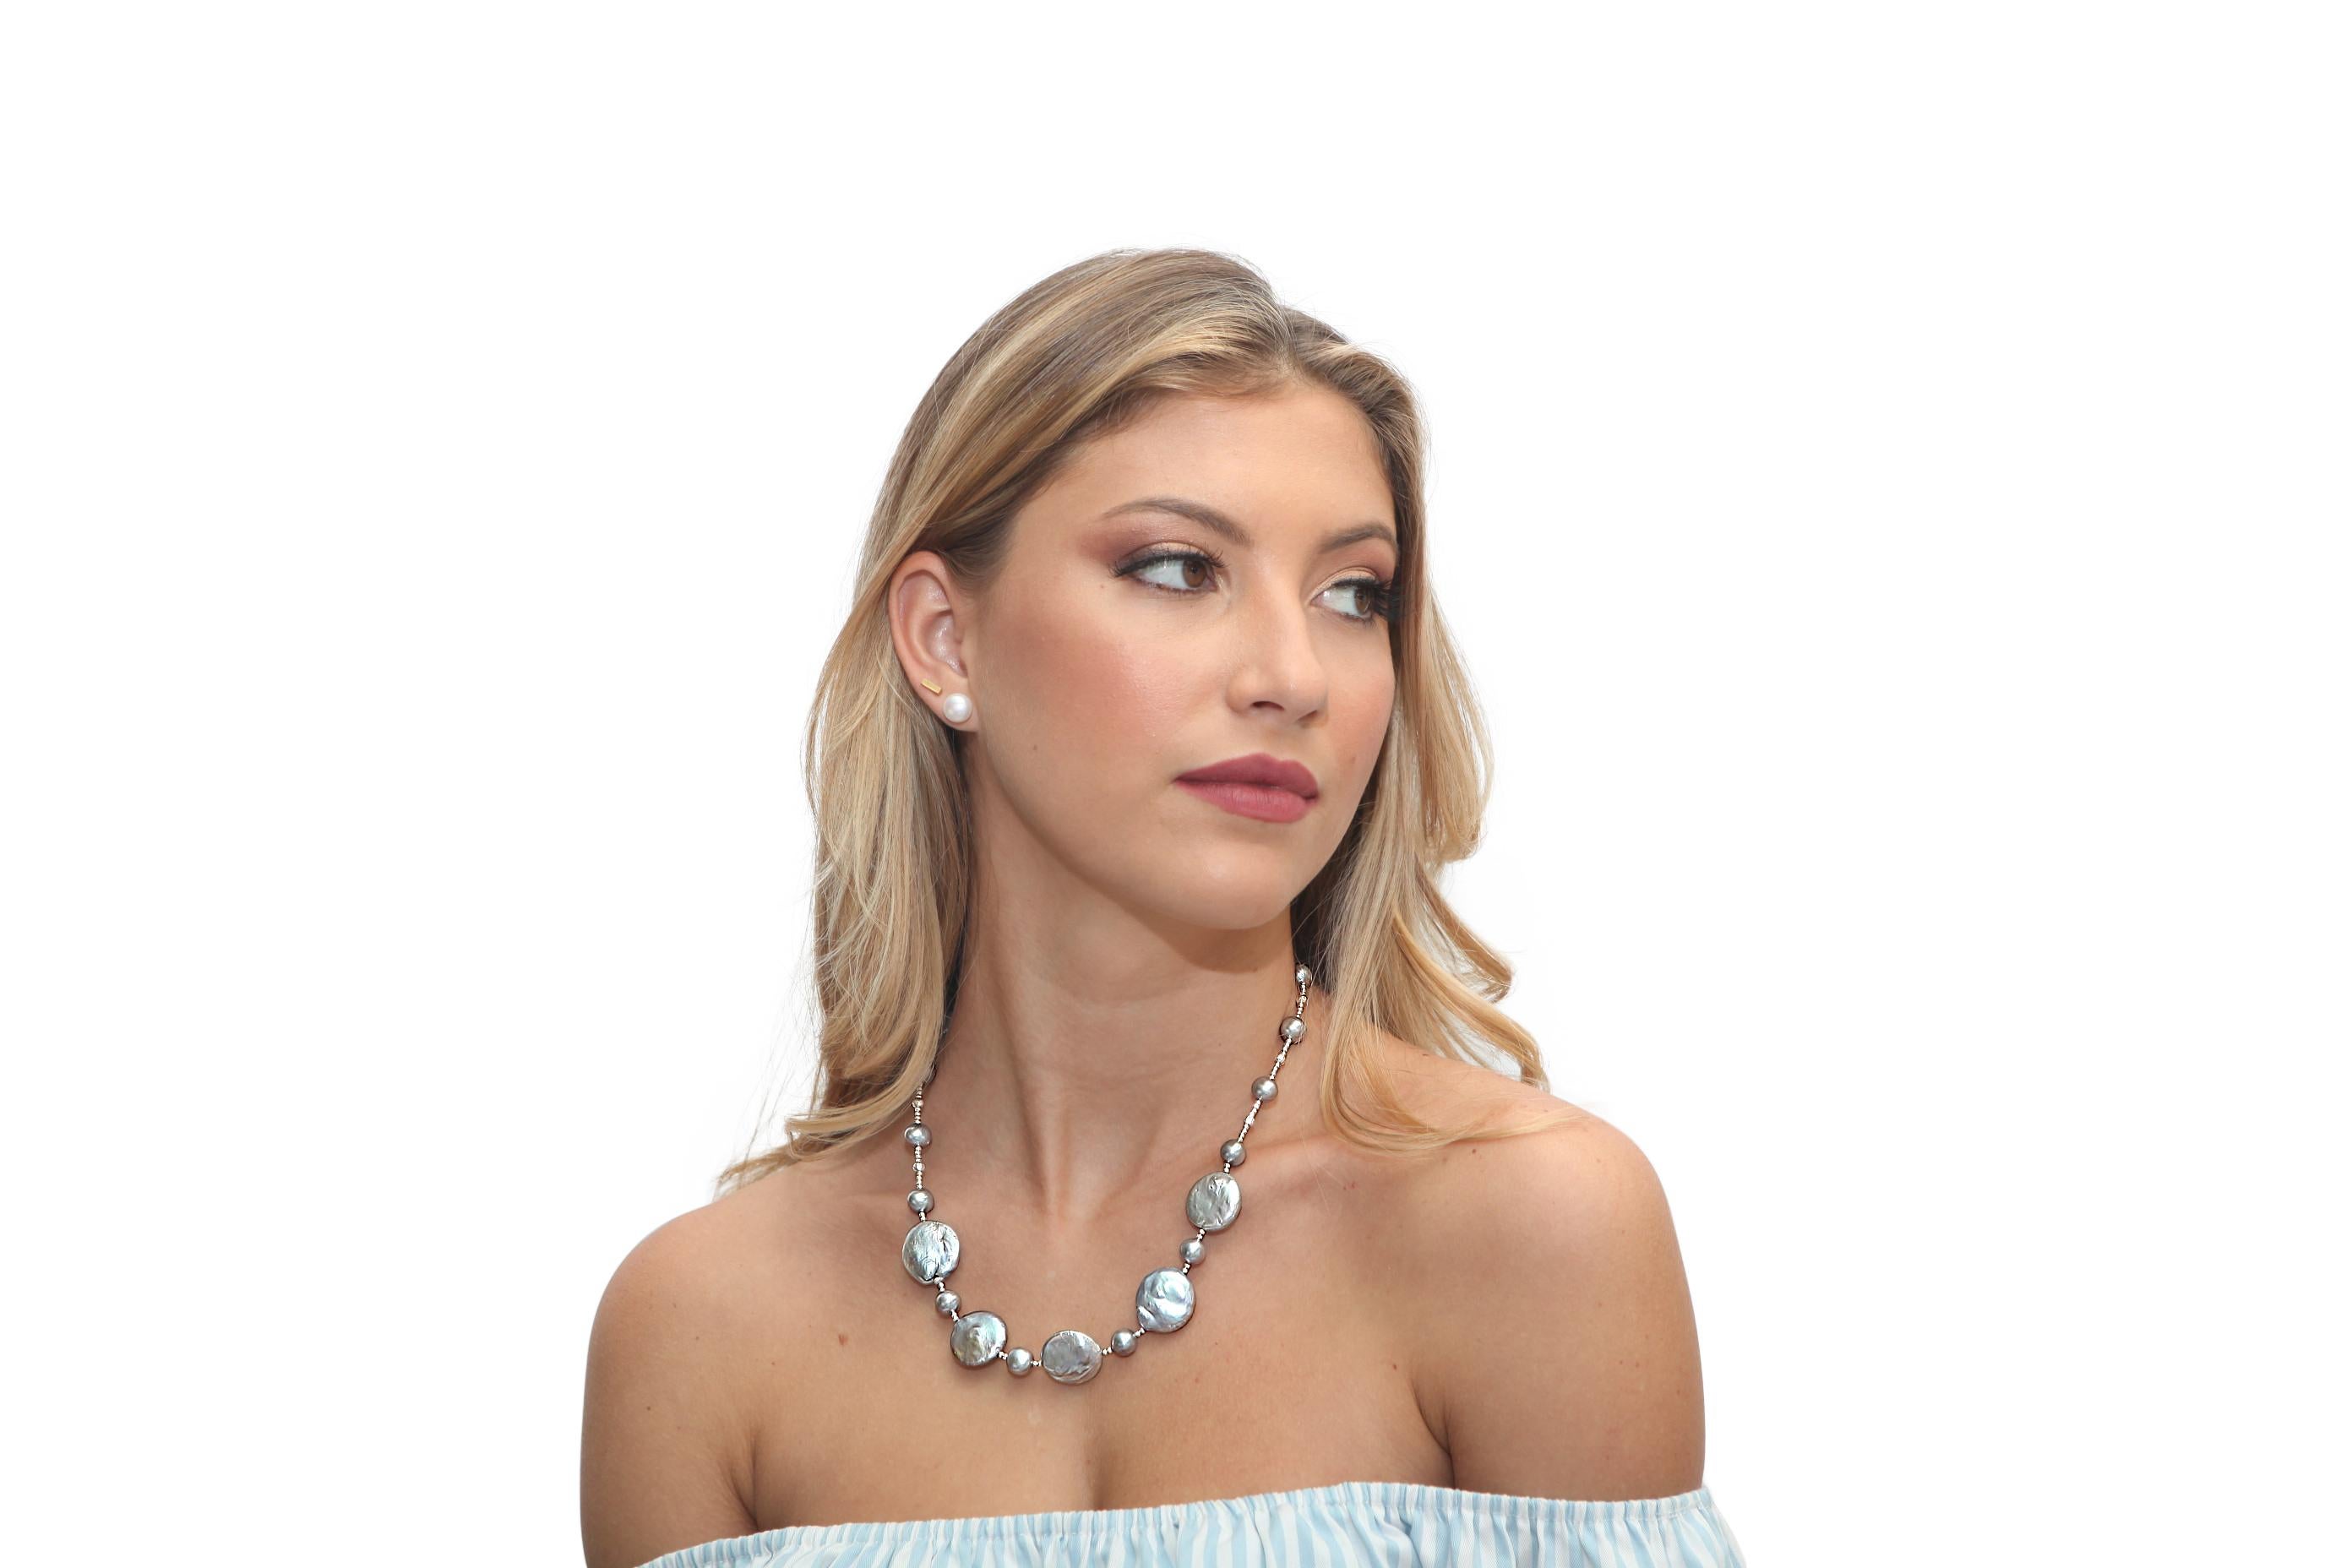 Freshwater Grey Pearl Necklace with 16 Semi-Round Grey Pearls Measuring 8.5-9mm Each and 5 Central Coin Pearls Measuring 20mm Each. Beautifully Spaced with Sterling Silver Diamond Cut Beads.